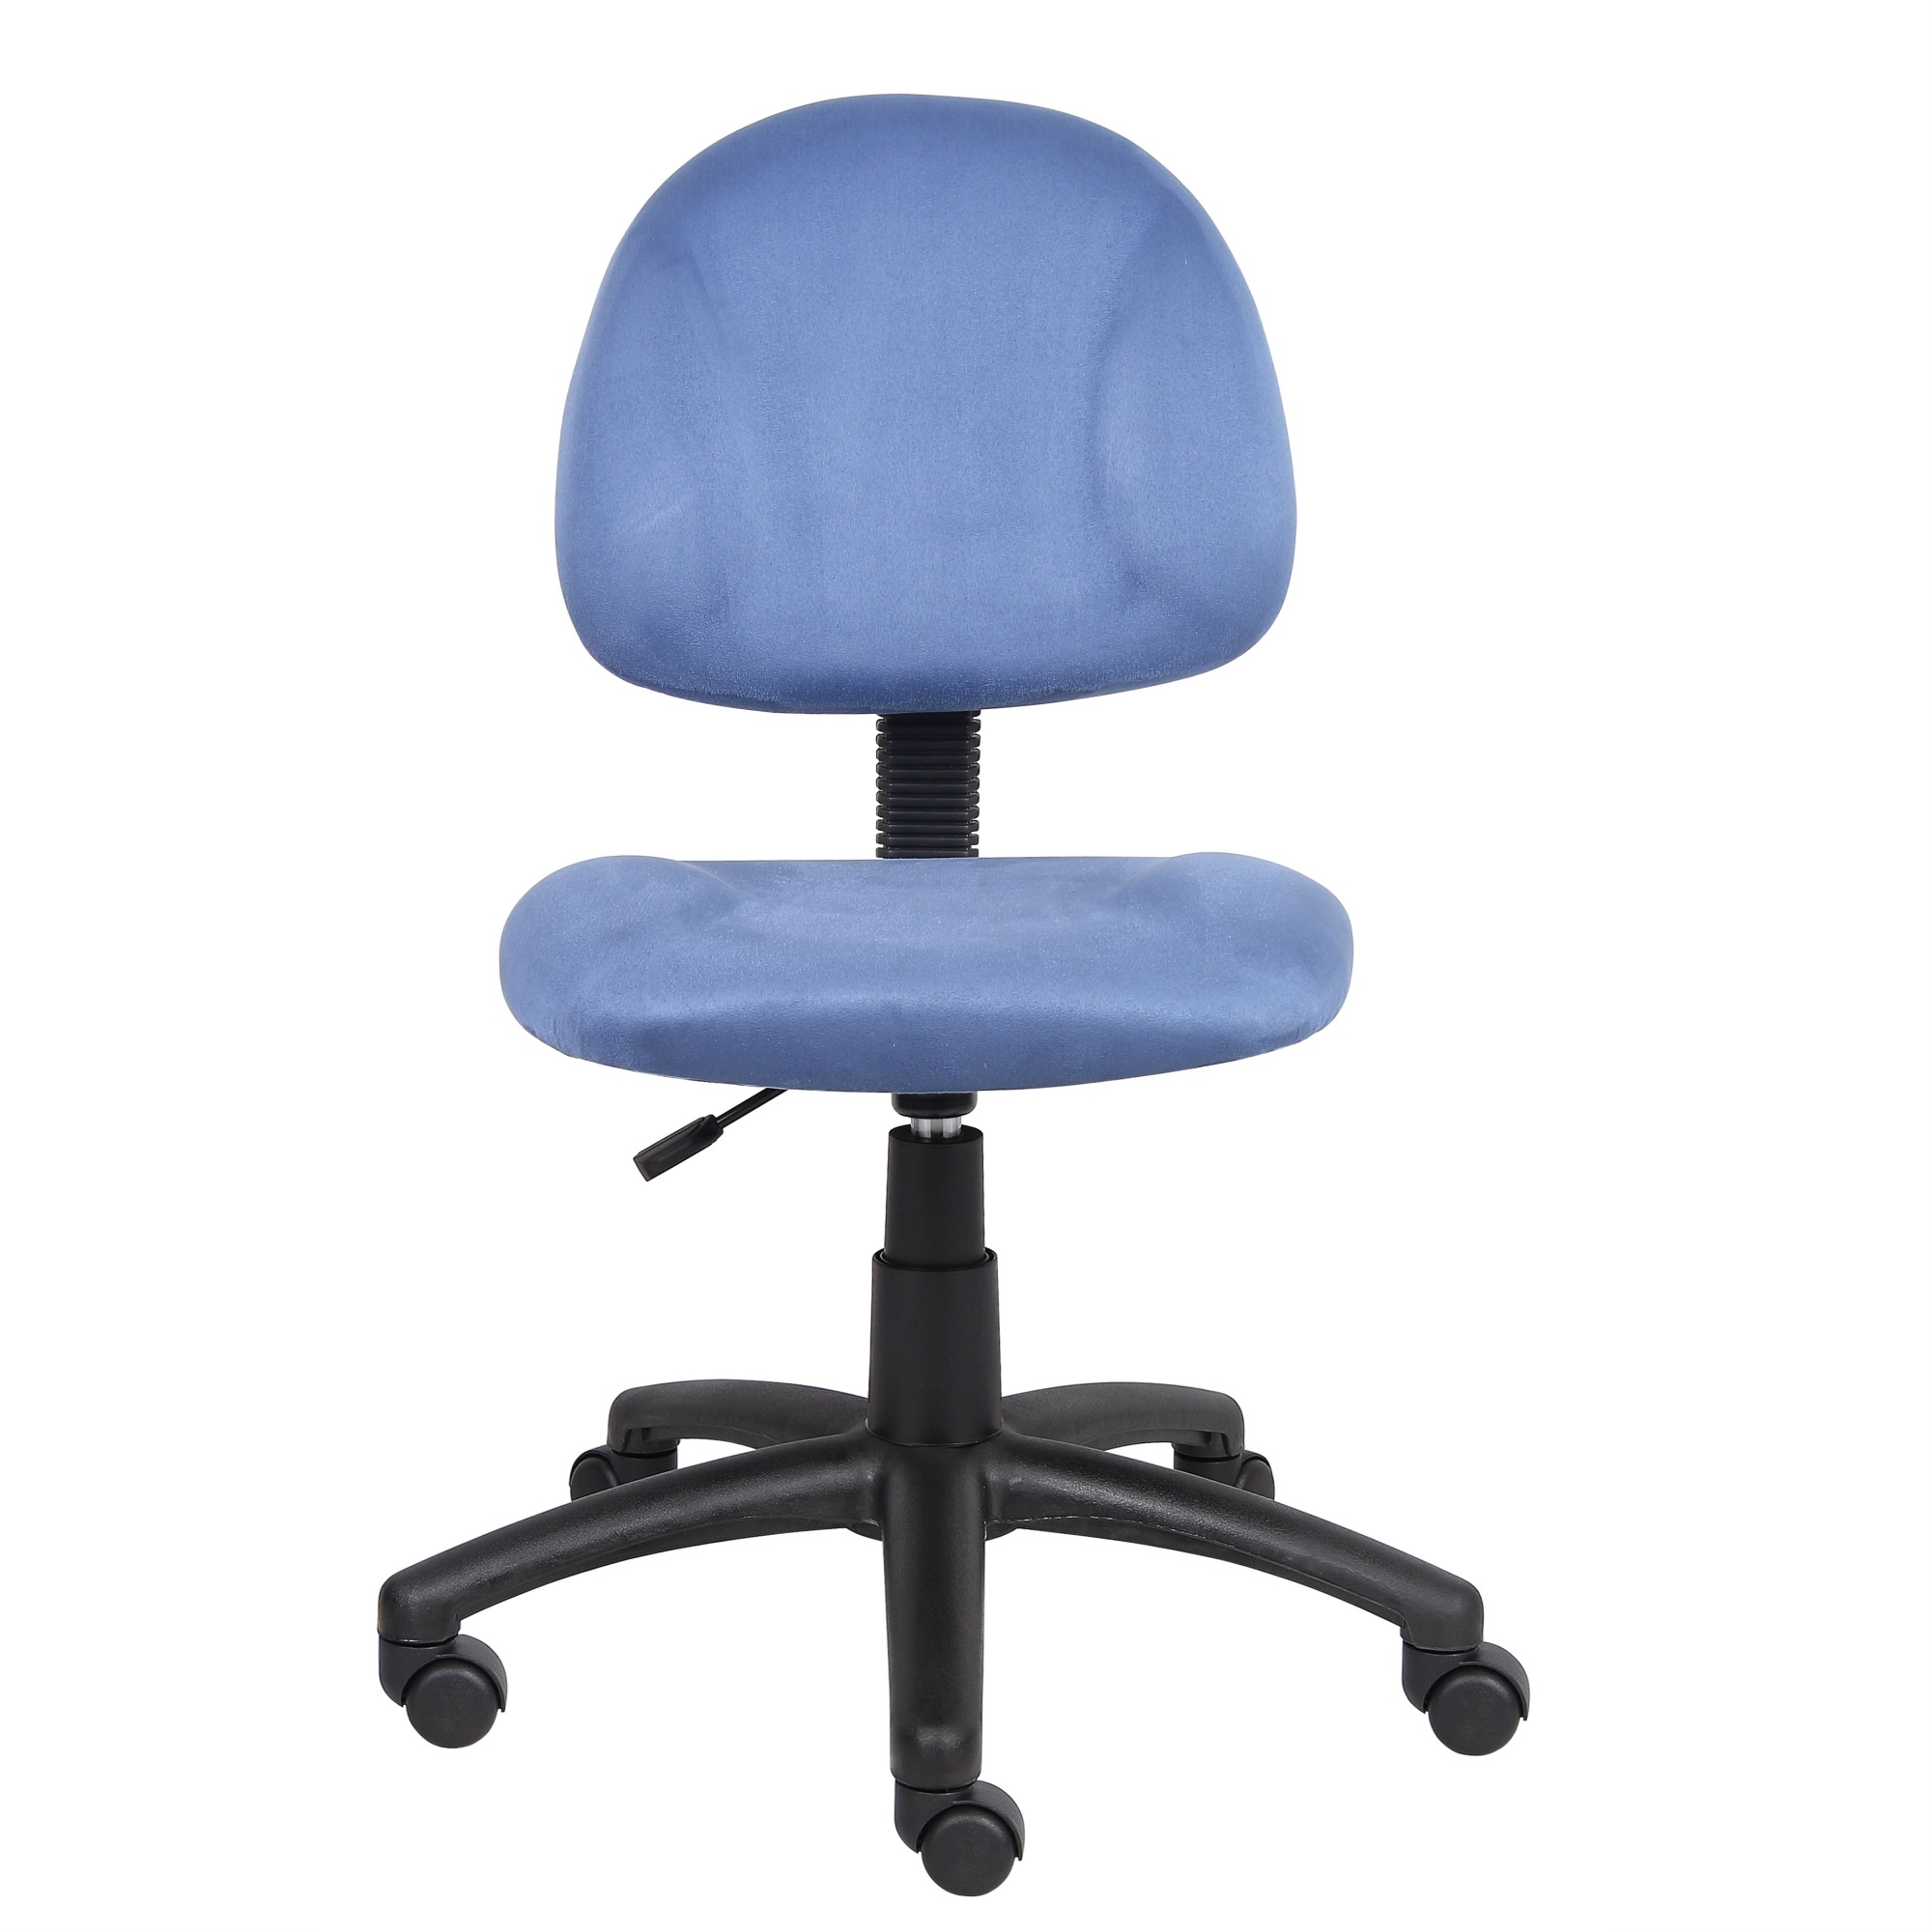 Boss Office Products B325-BE Perfect Posture Deluxe Modern Home Office Chair without Arms, Blue - image 3 of 6